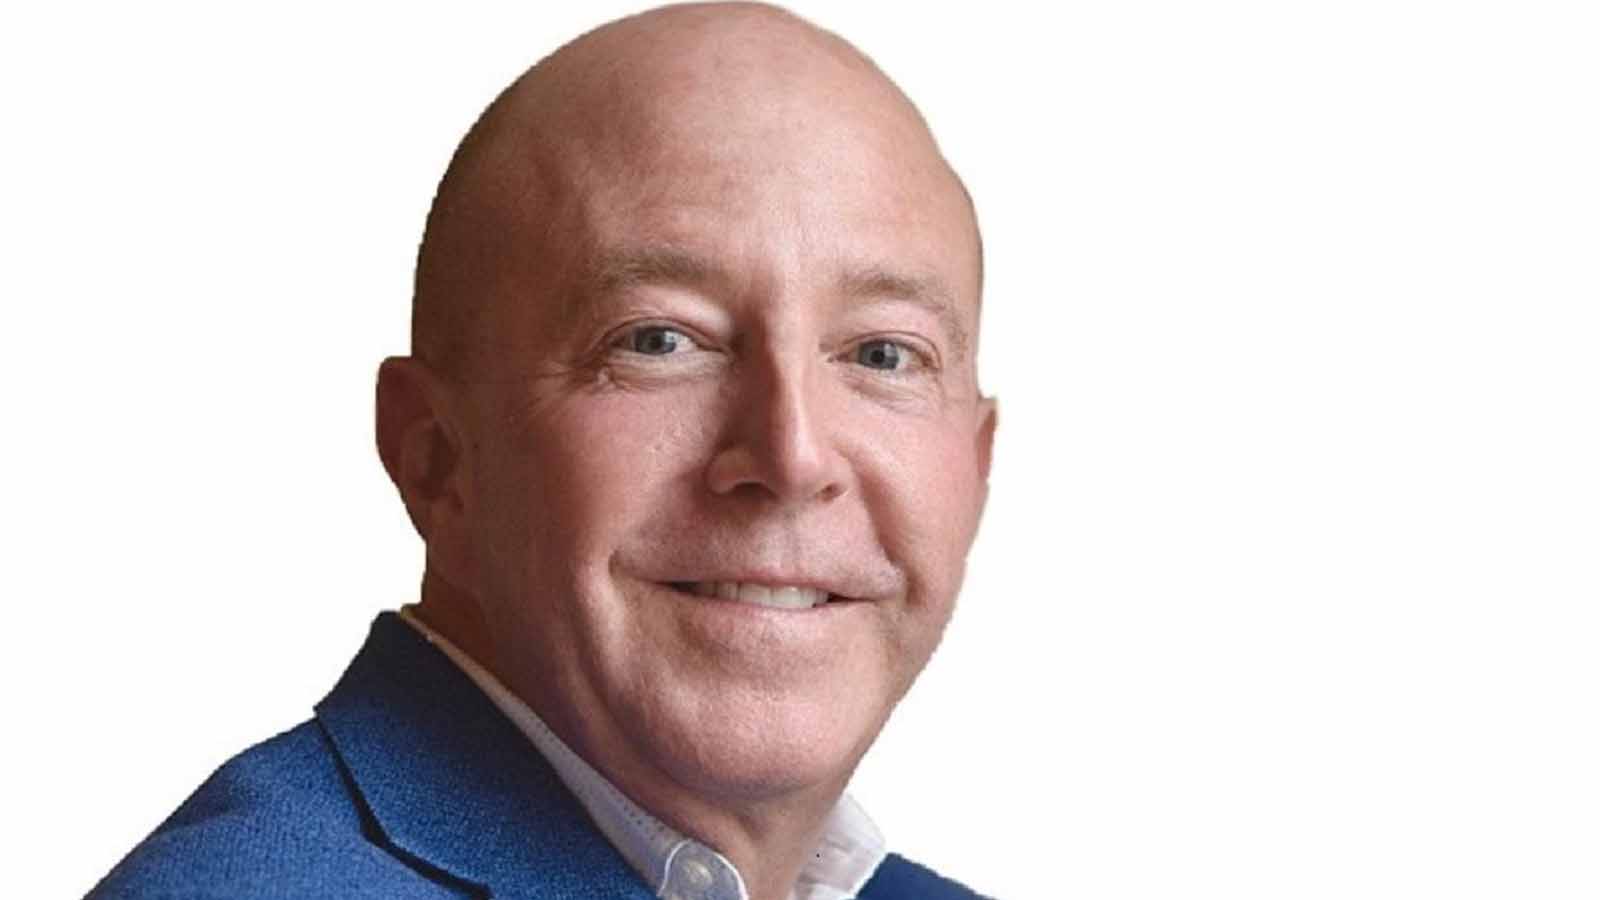 Chattanooga Realtor Mark Hite Wikipedia And Age: Net Worth Details